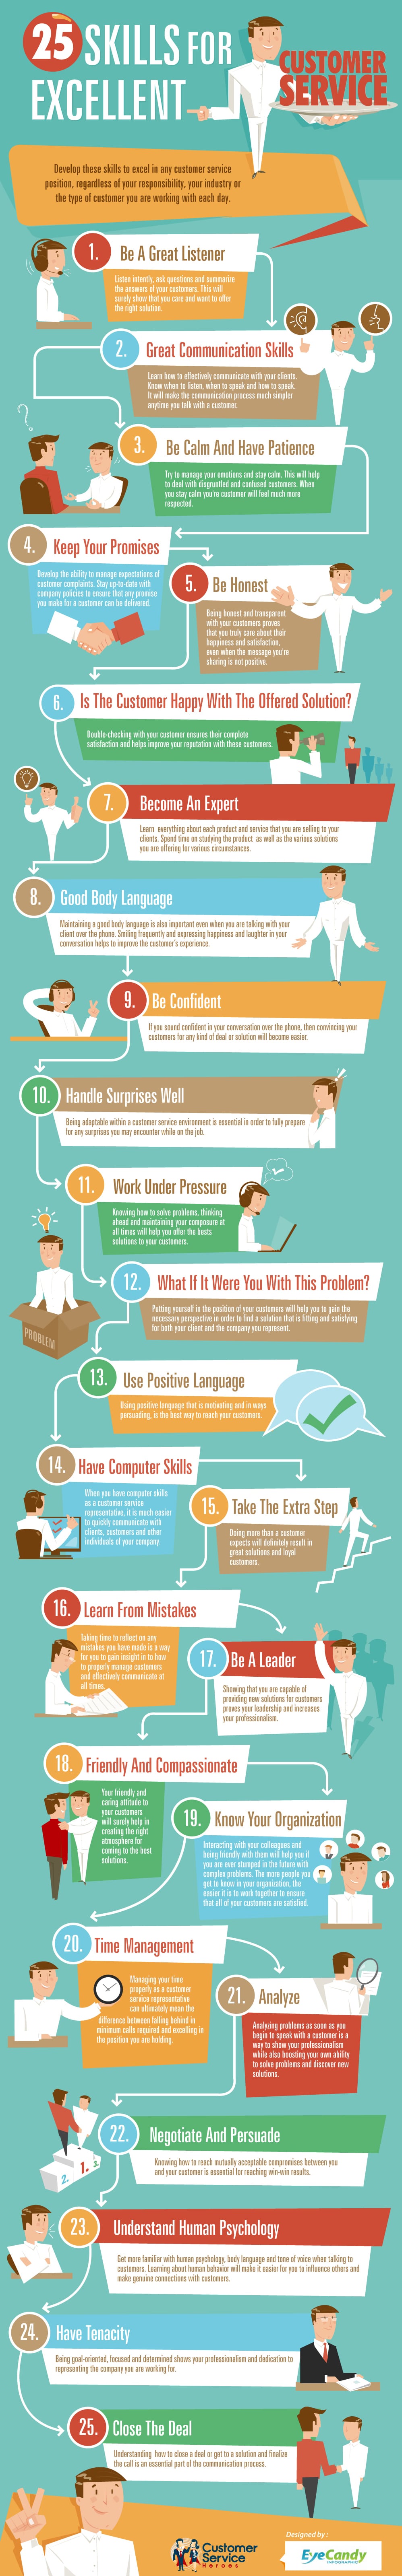 25 Customer Service Skills Every Company Should Require [Infographic]